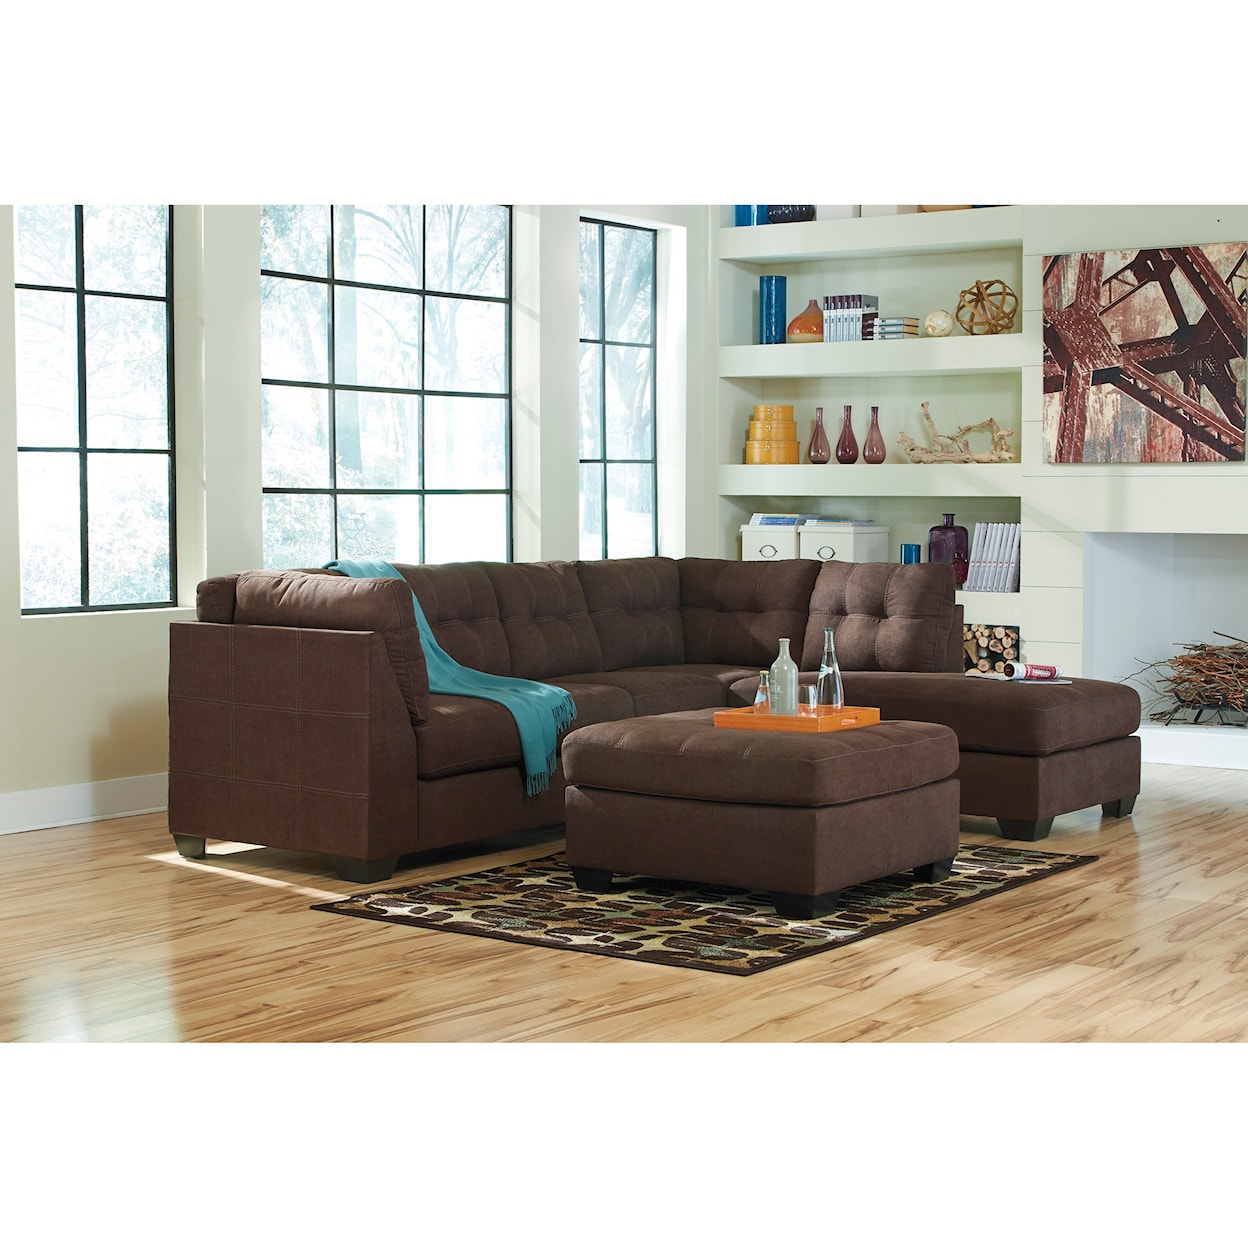 Benchcraft by Ashley Maier 2-Piece Sectional with Chaise